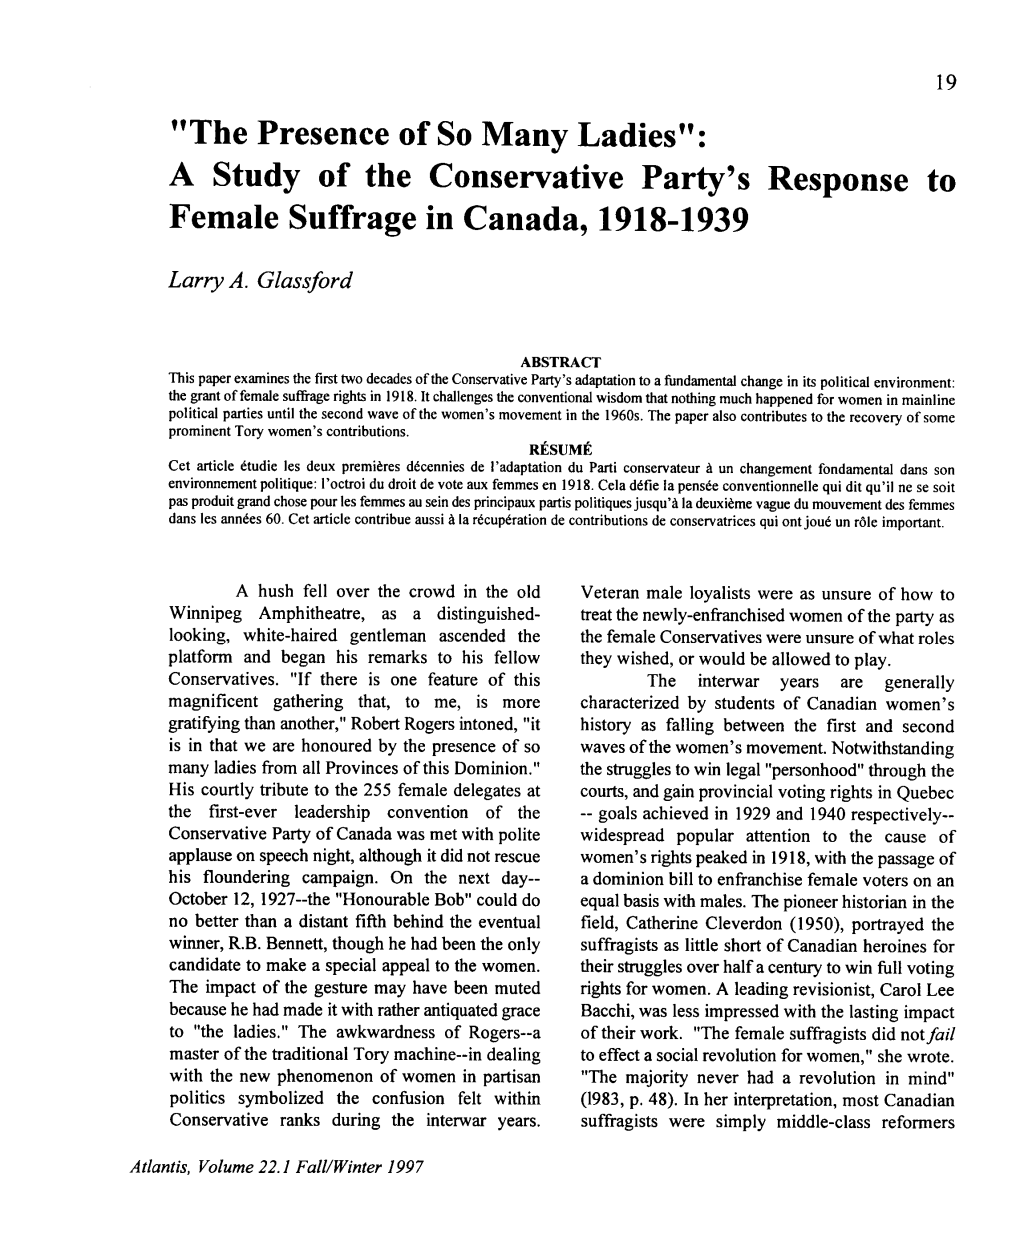 A Study of the Conservative Party's Response to Female Suffrage in Canada, 1918-1939